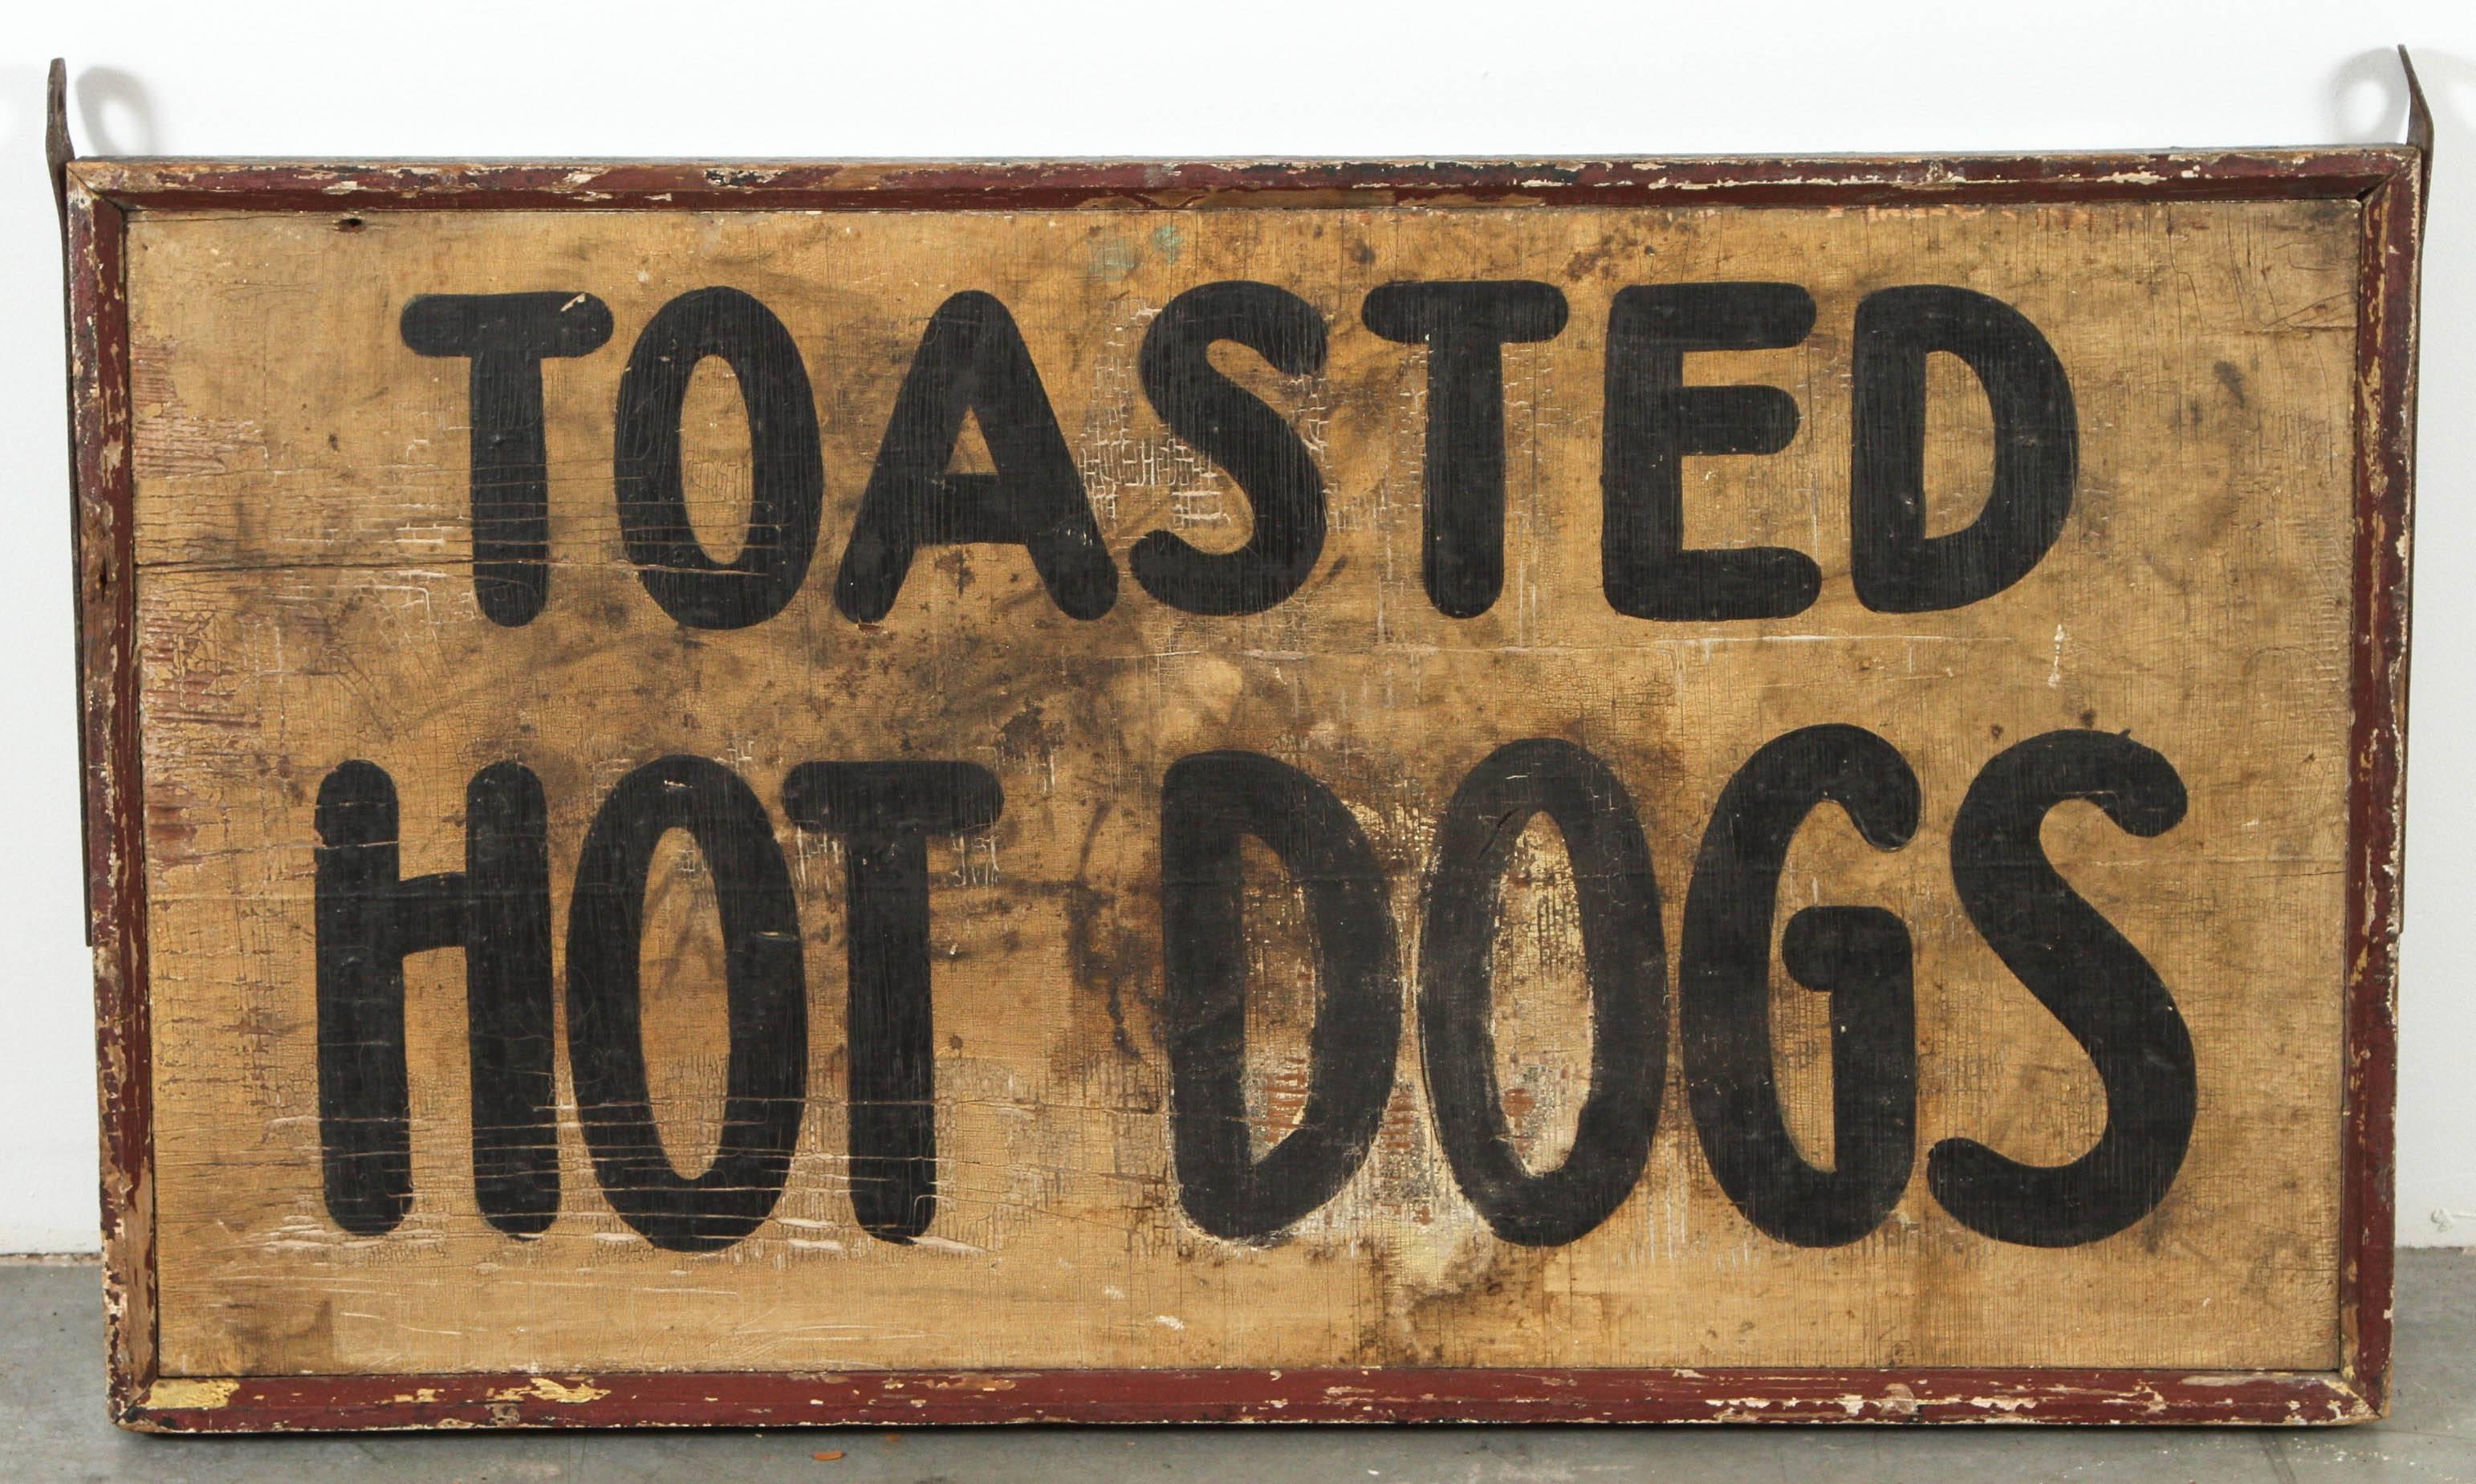 The best subject matter! Late 19th century handpainted American trade sign. Very heavy wood construction with iron strapping. This sign is double sided. One side was exposed to the elements more. Please see close-up images for the fantastic heavily